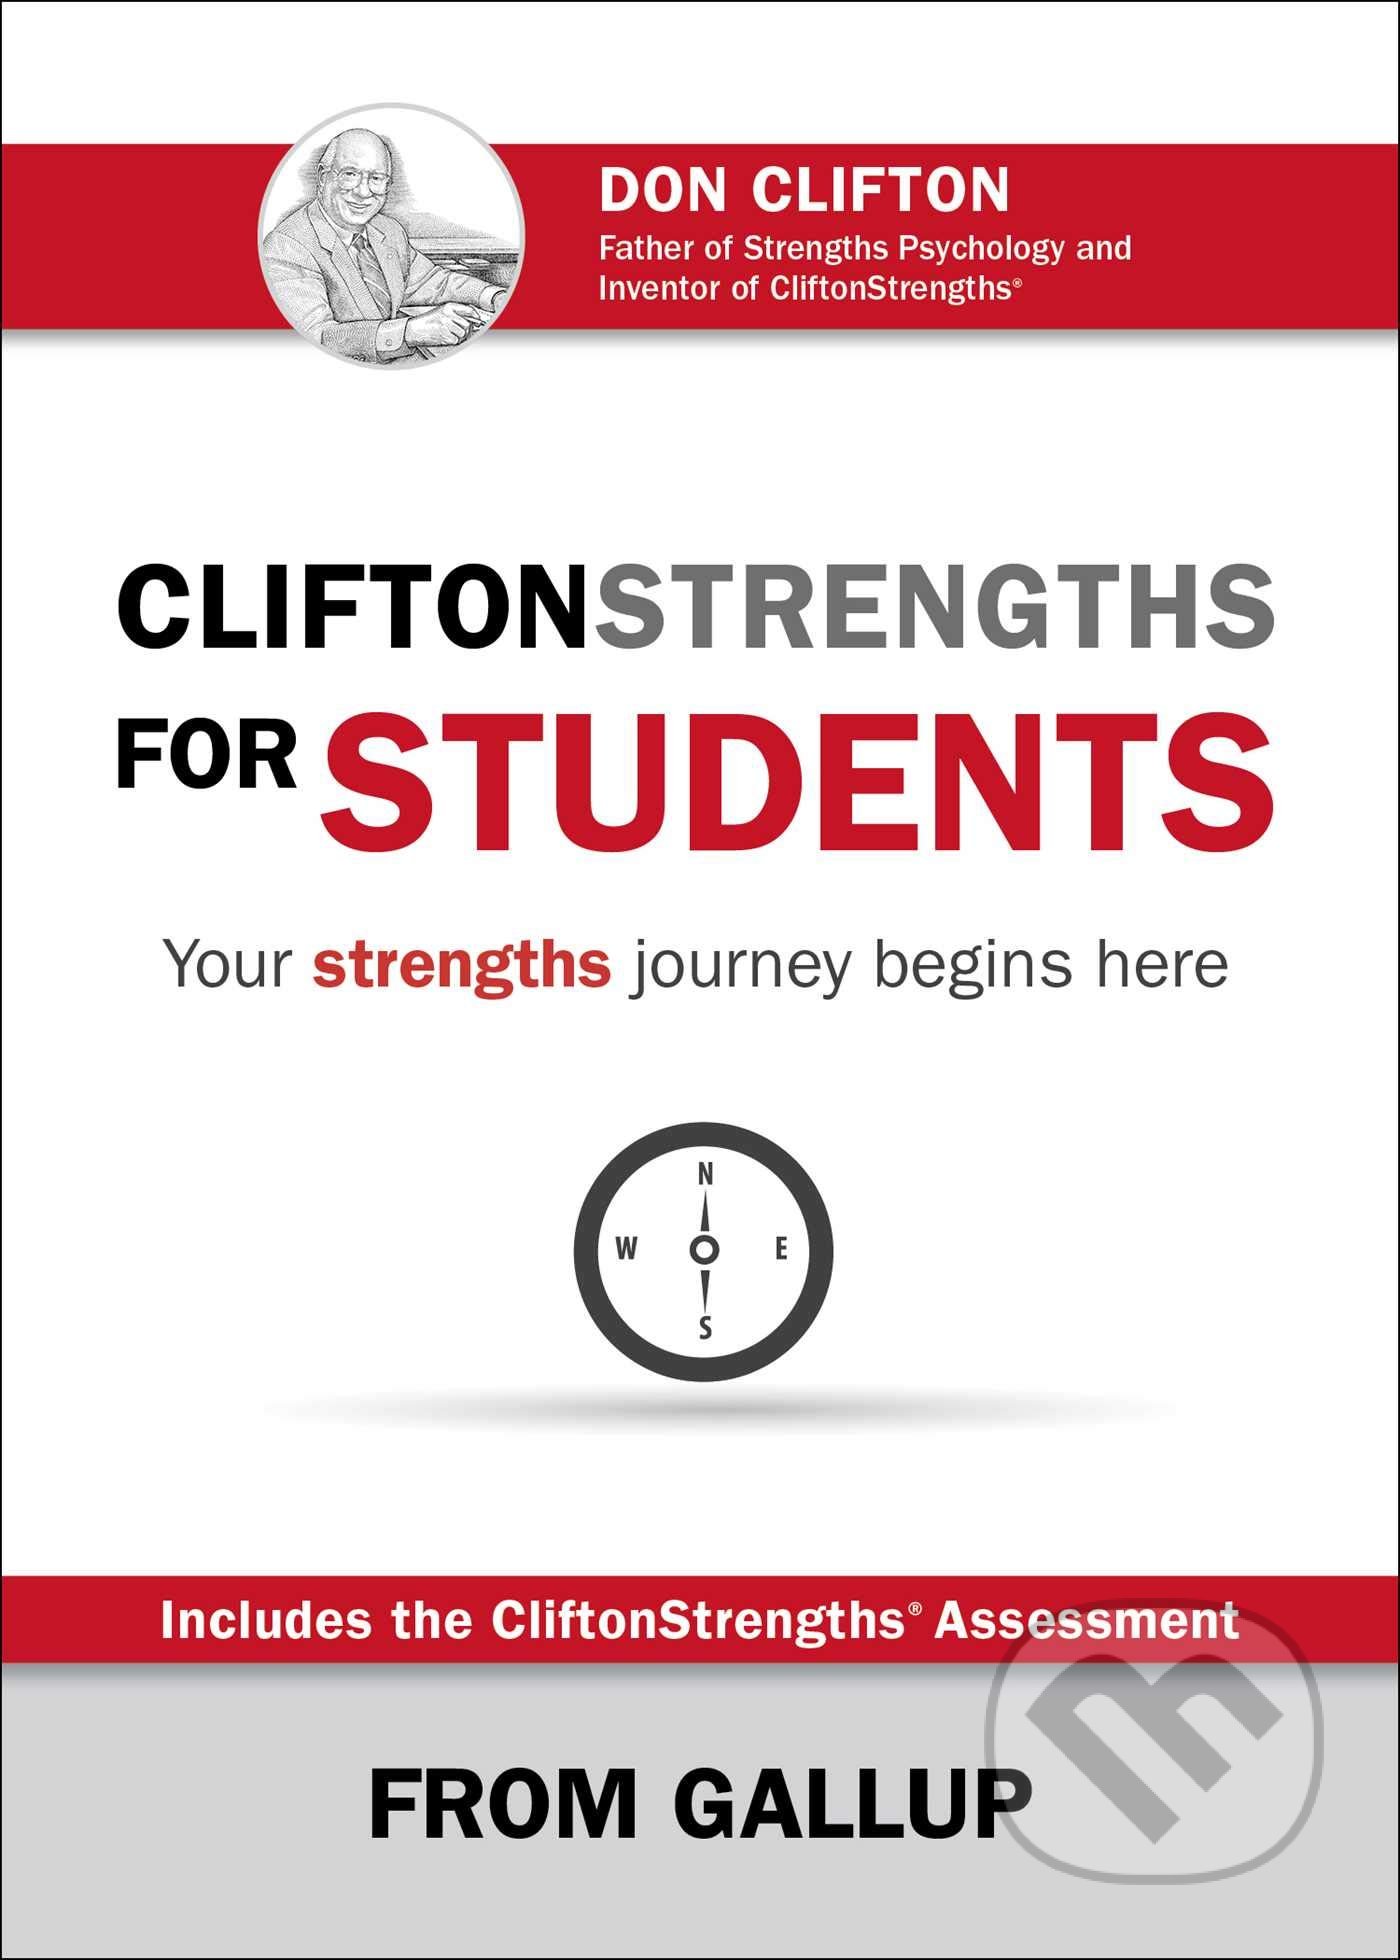 CliftonStrengths for Students, Gallup, 2017